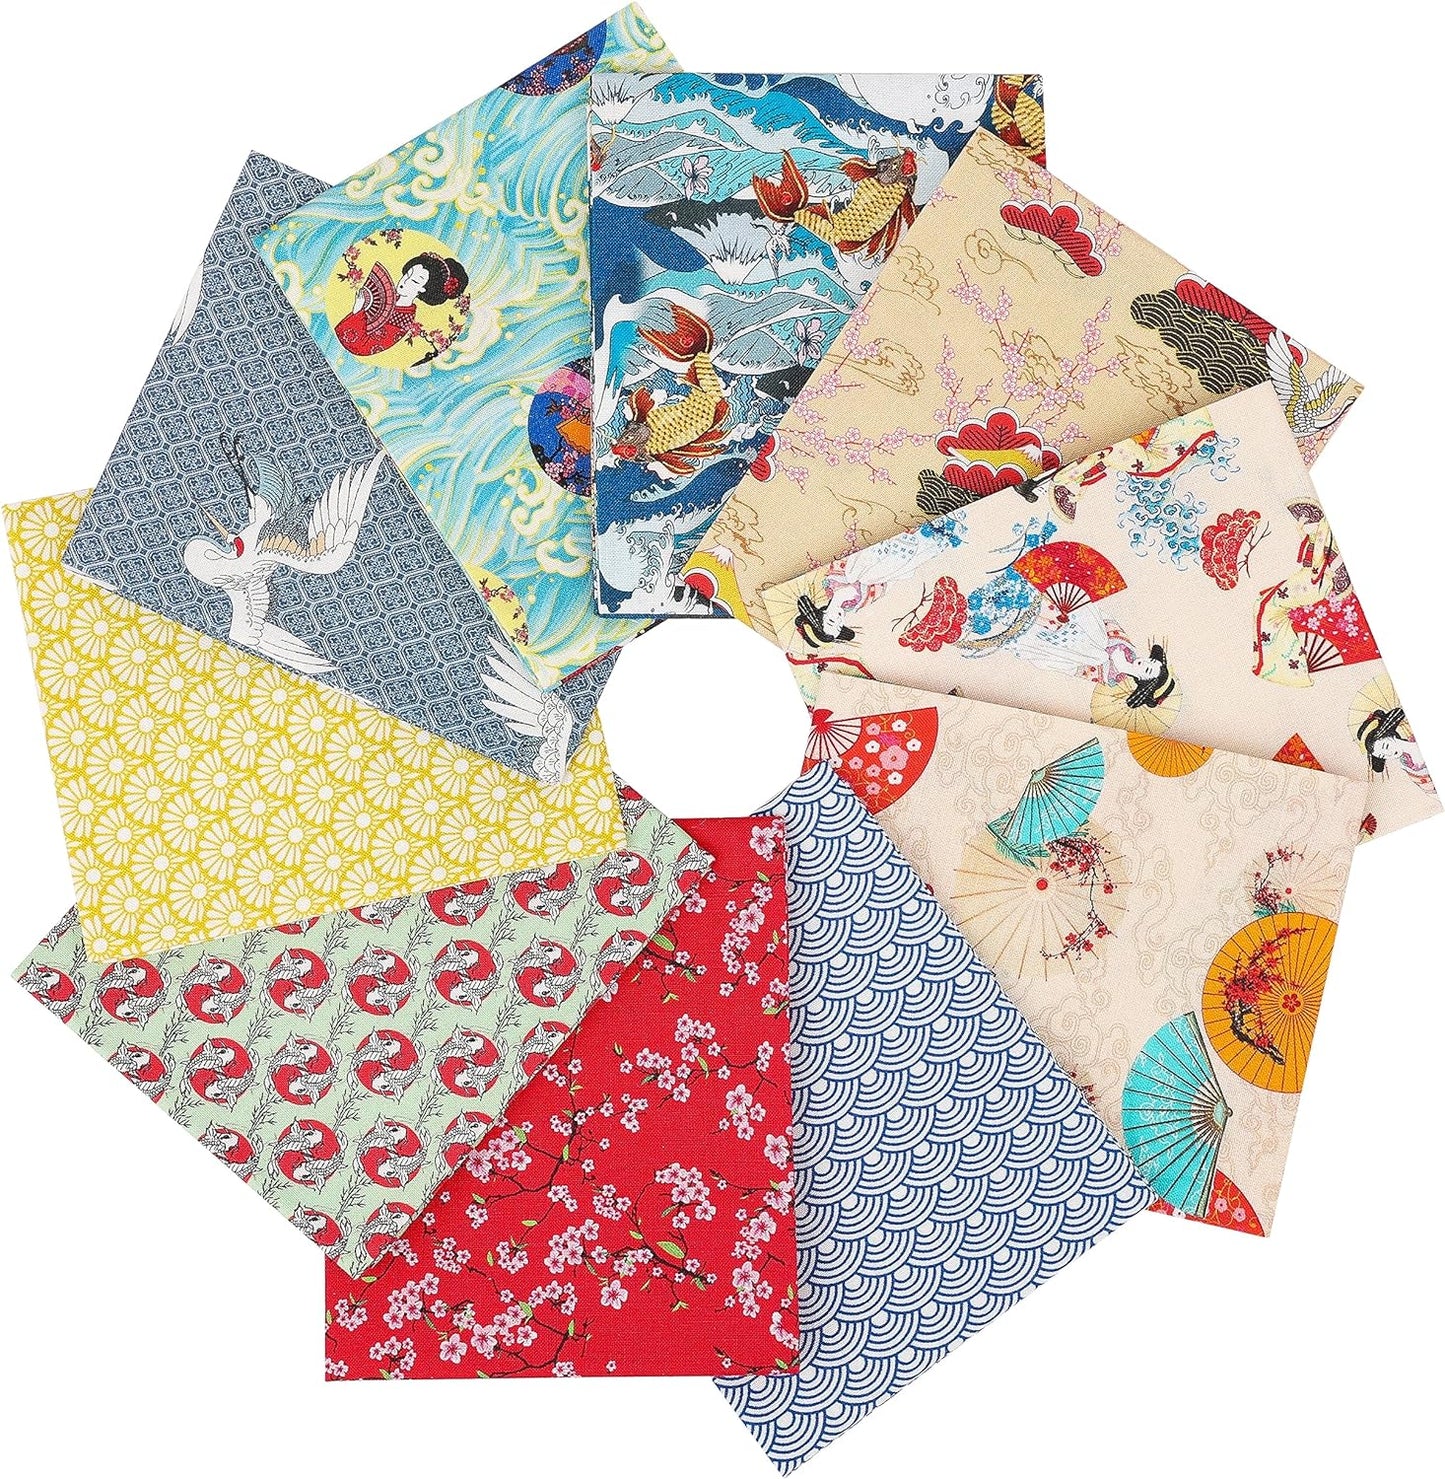 Craftido -25 Options- 100% Cotton Quilting Fabric Bundles 10pcs Fat Quarters 18”x21”-Medium Weight 5.2 oz- for Quilting, Sewing Project, Patchwork, DIY Crafts